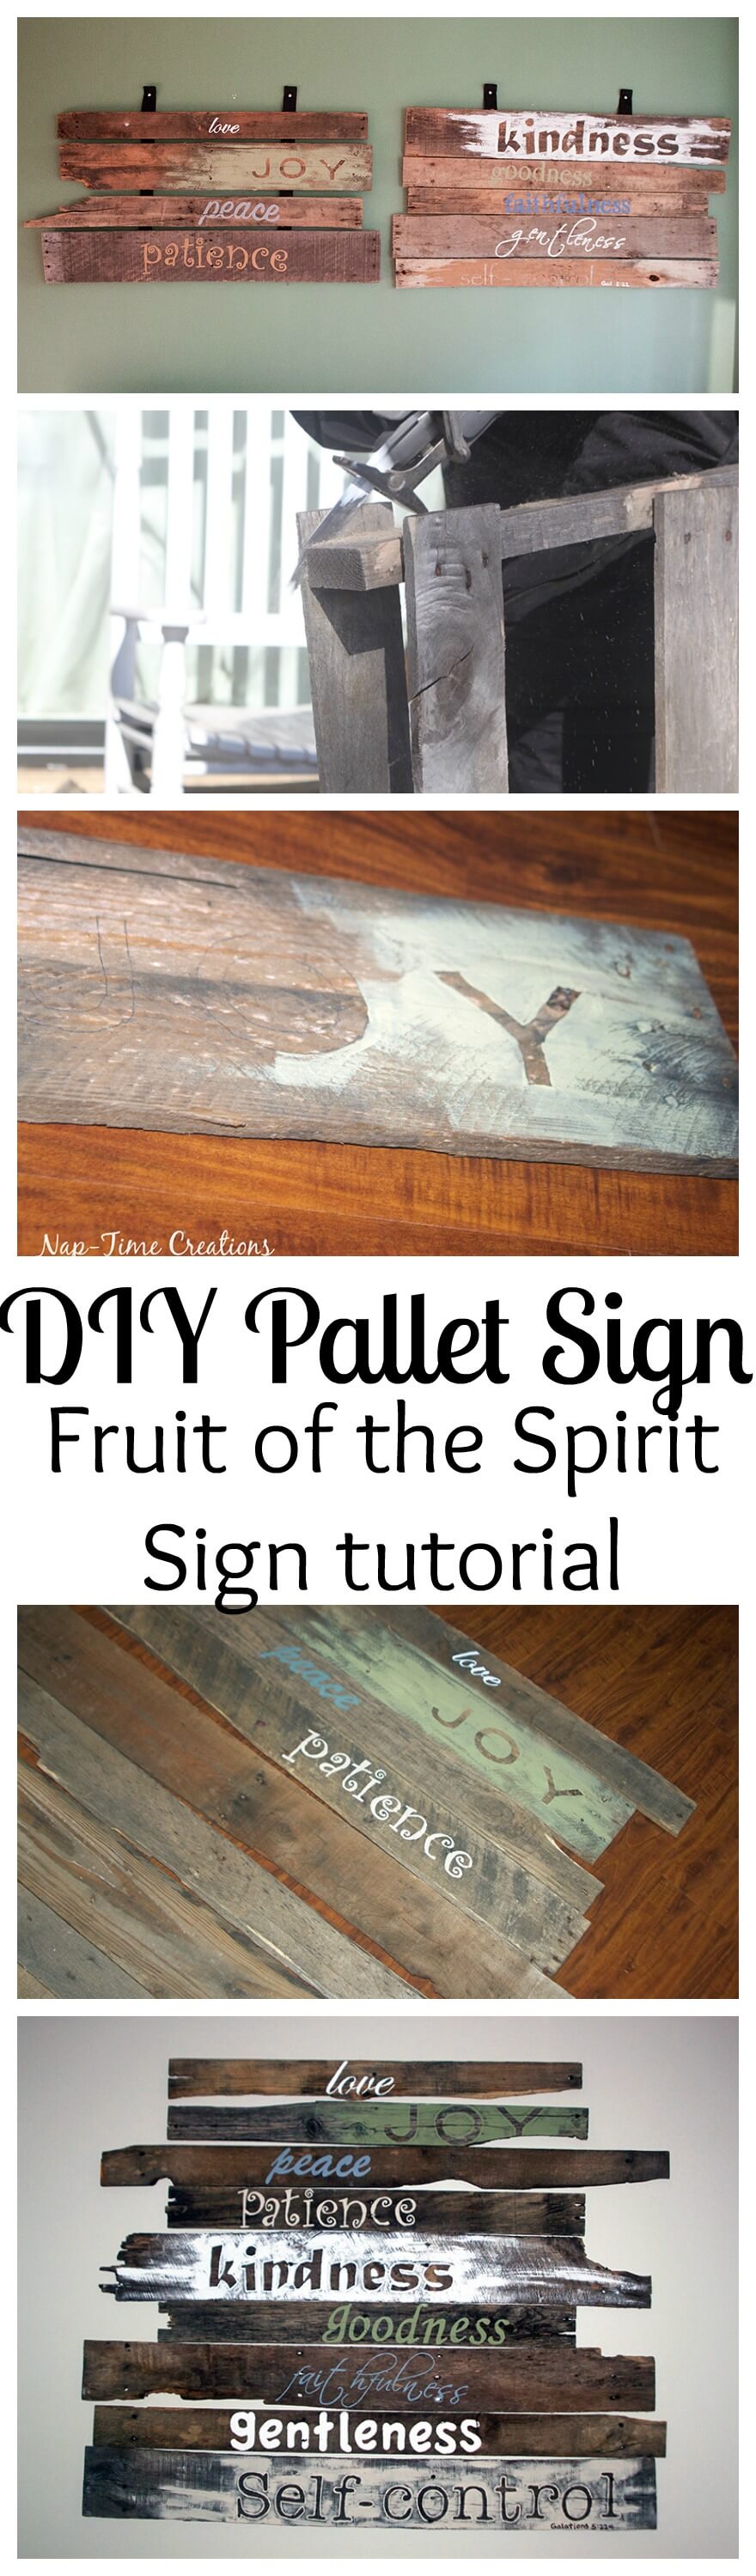 Fruit of the Spirit Pallet sign from Nap-Time Creations